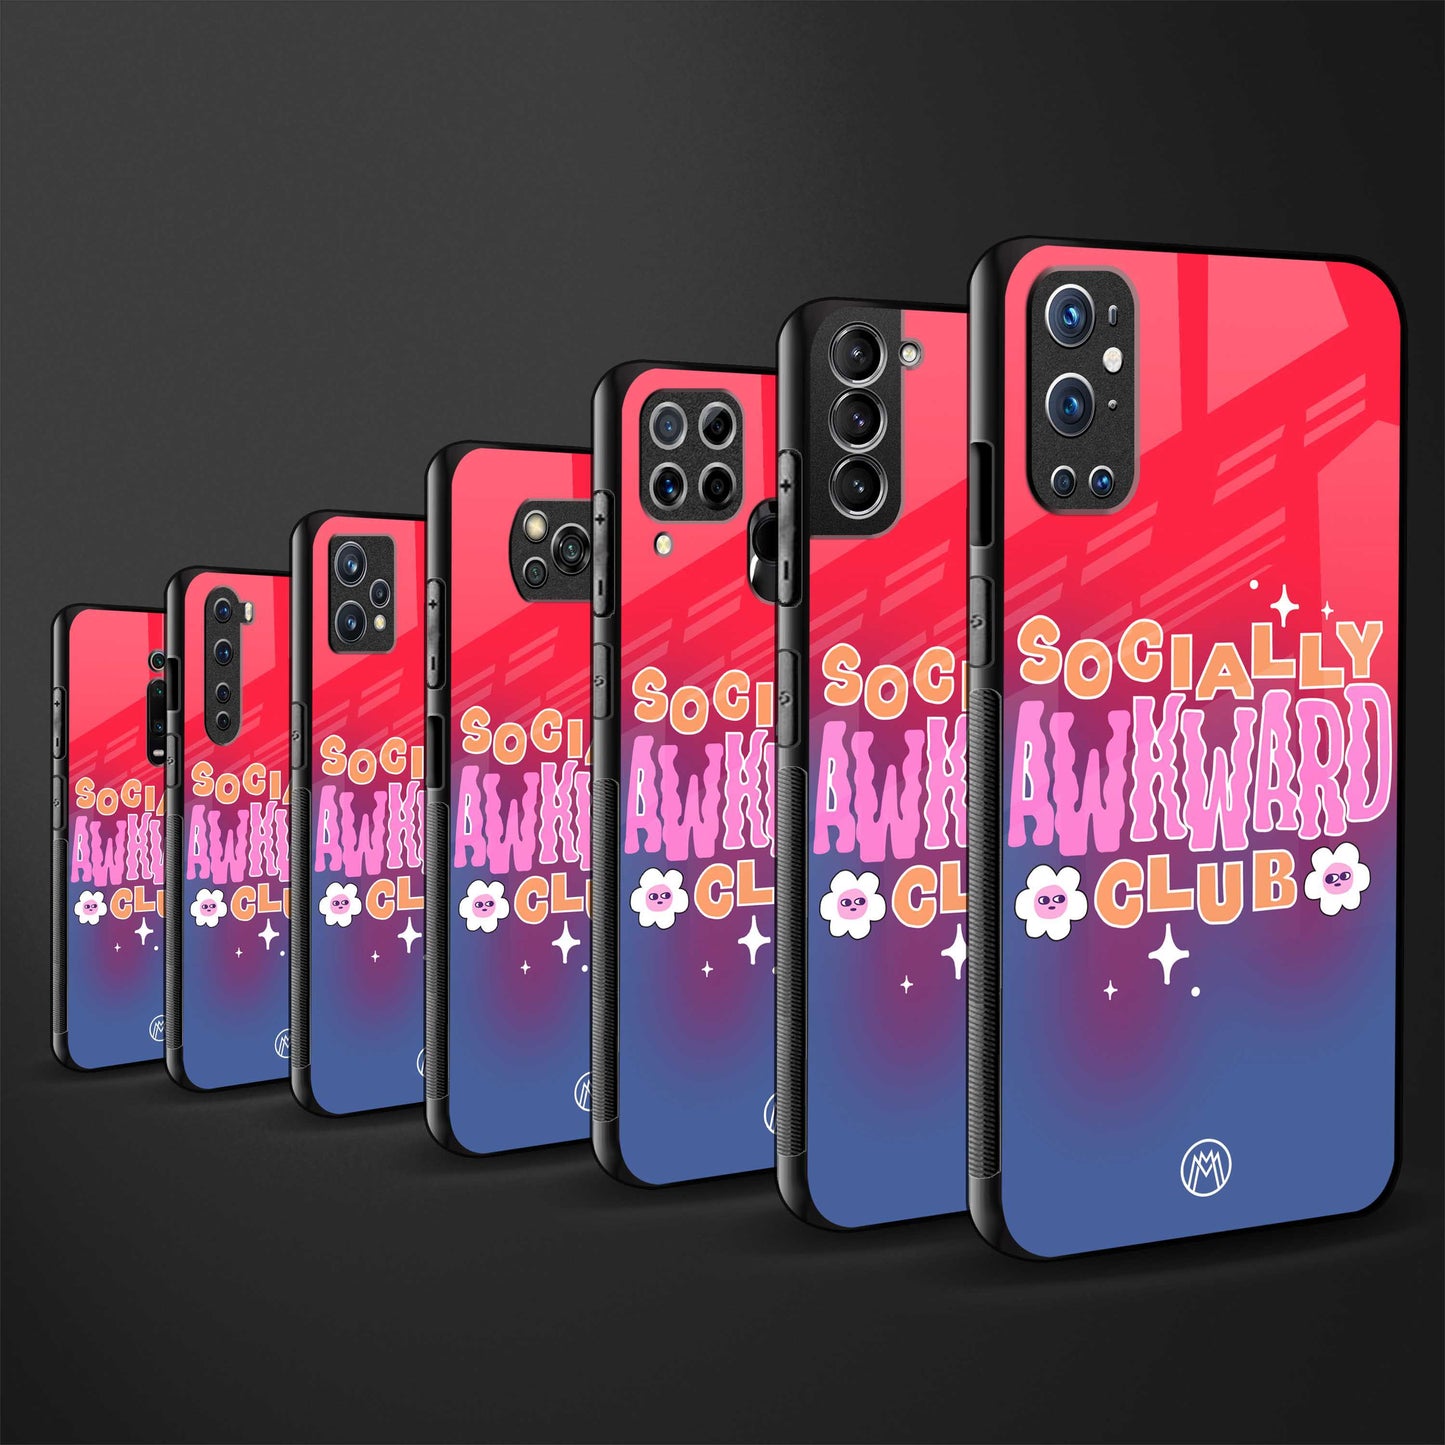 socially awkward club back phone cover | glass case for google pixel 7 pro